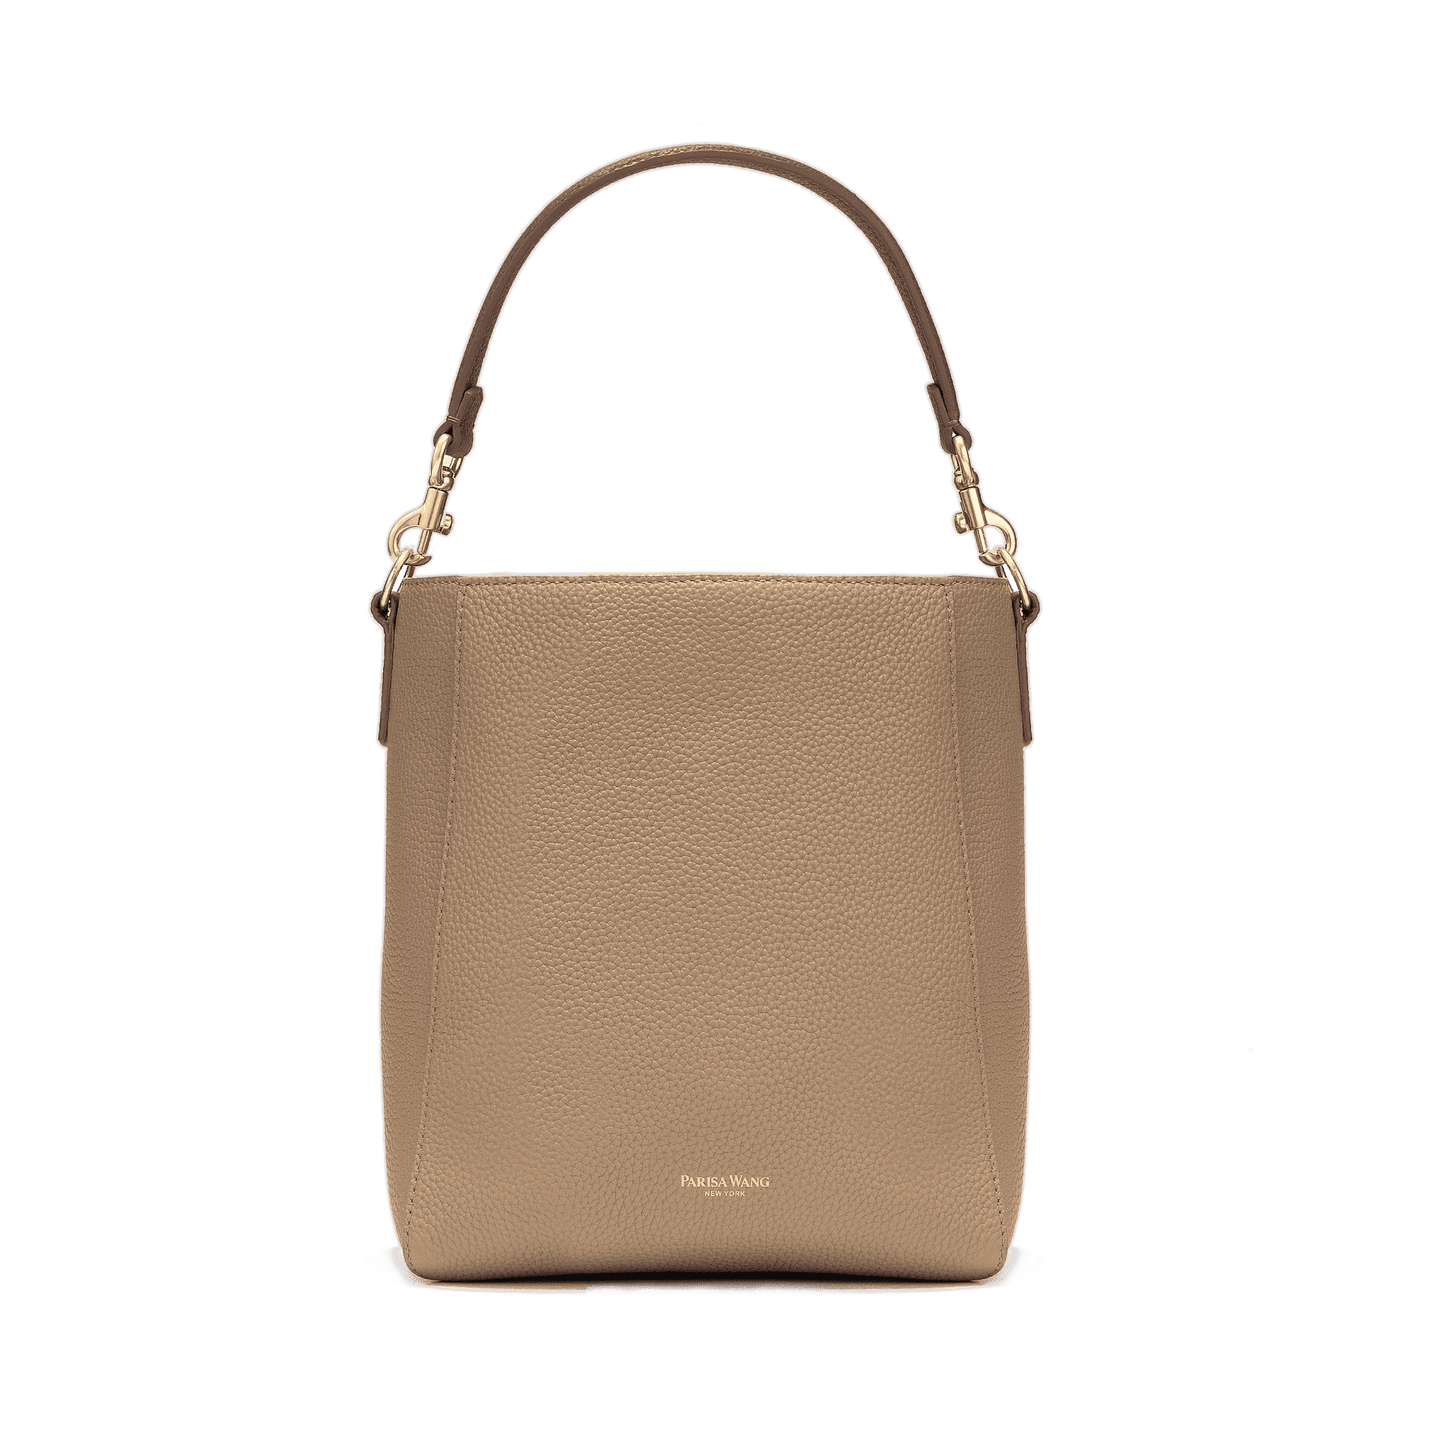 Strathberry Lana Bag Review 